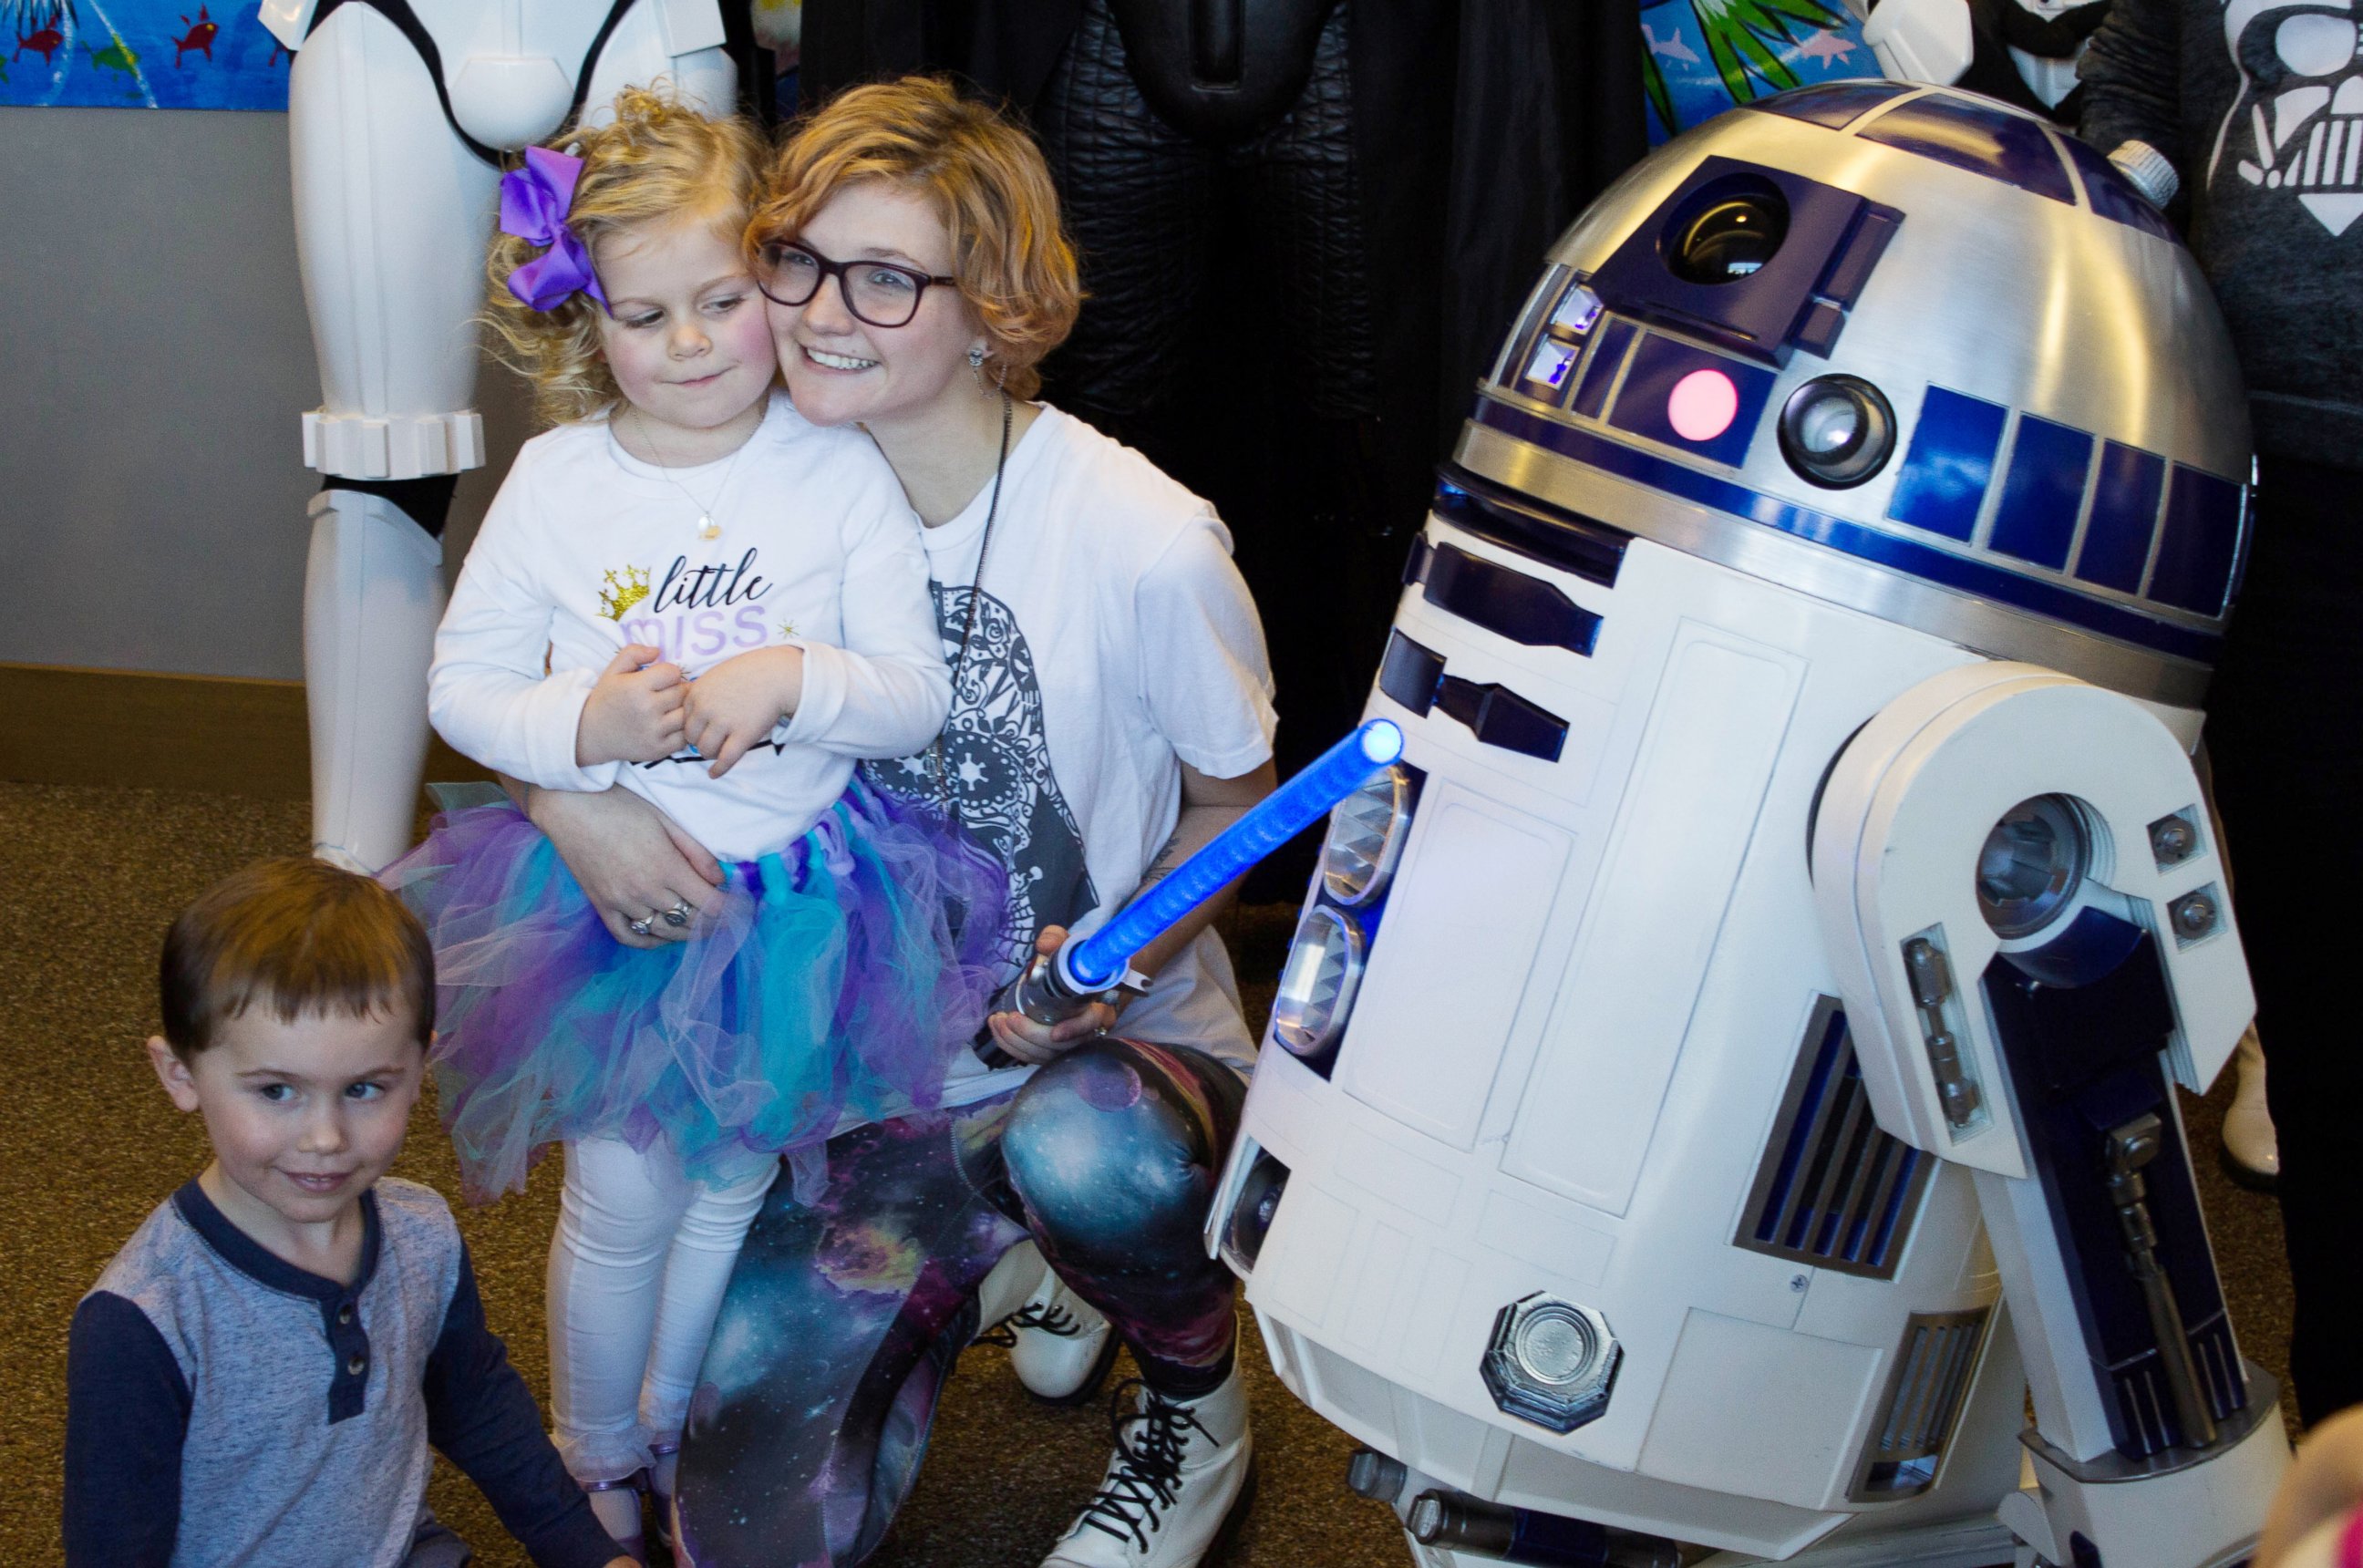 PHOTO: Zoe Pedicone, 4, was greeted by her favorite "Star Wars" characters on Dec. 23 just moments before being adopted by her new mom, Deanna Pedicone of Newark, Delaware.